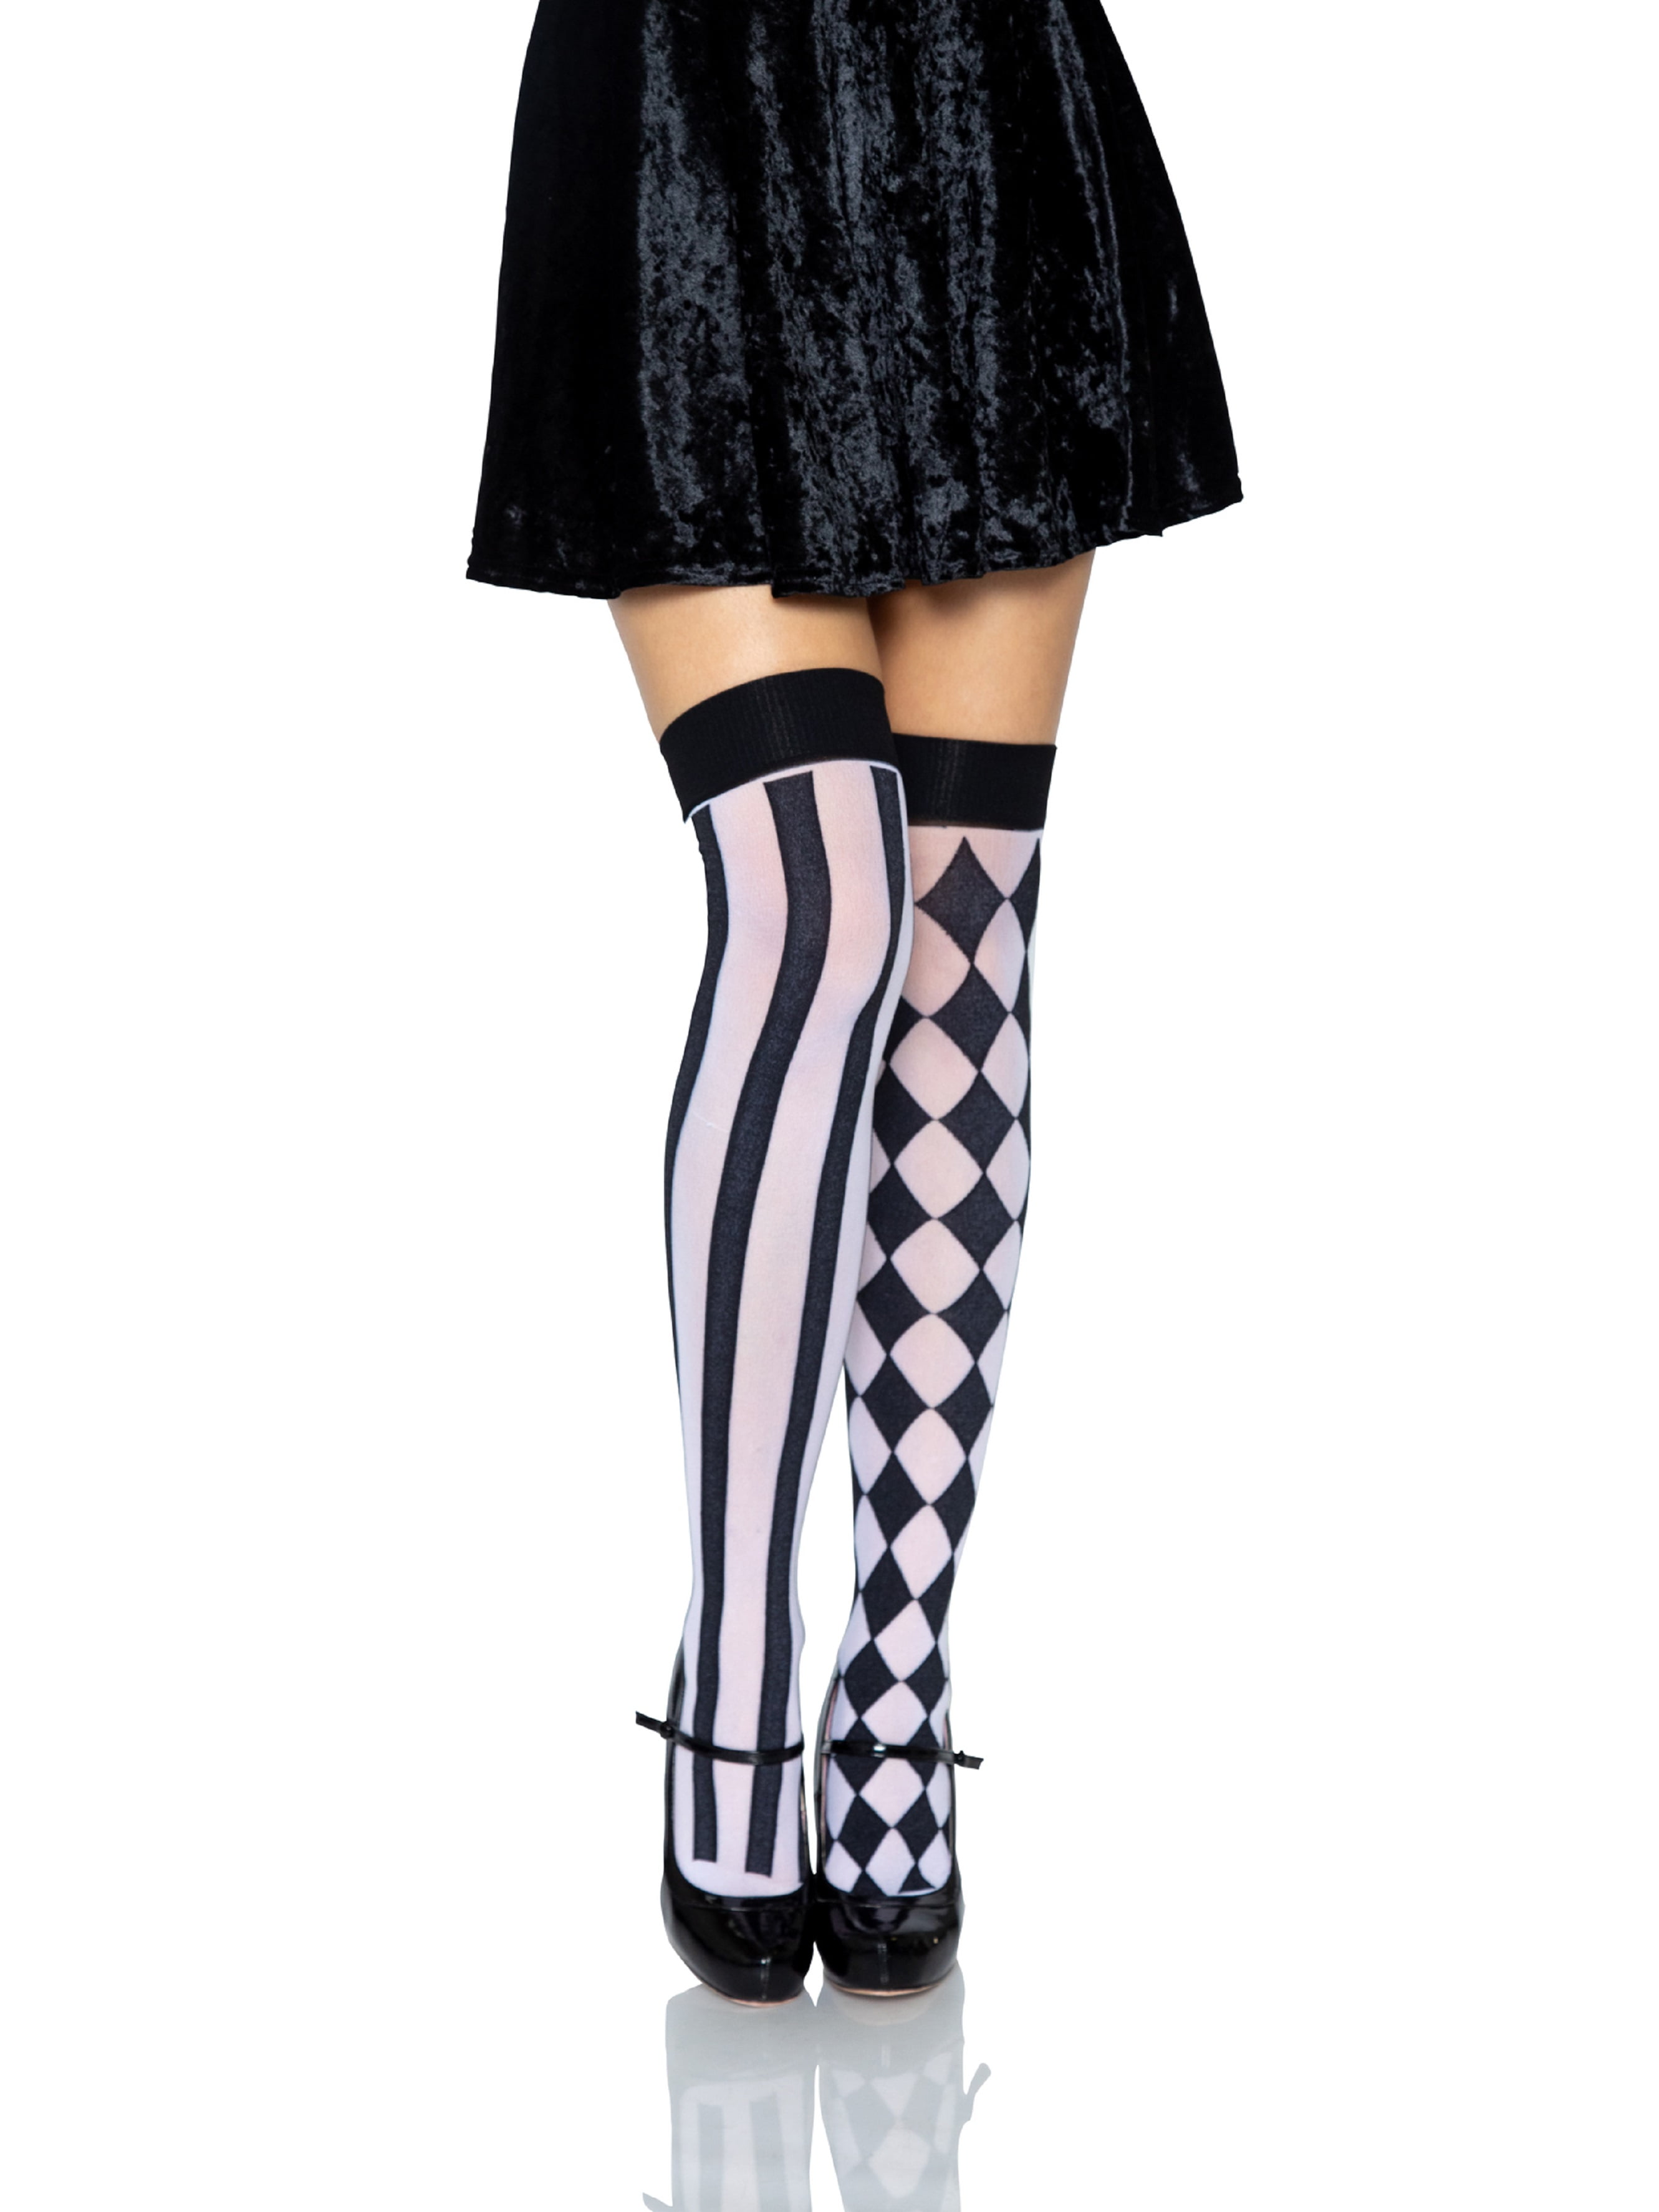 Way to Celebrate Fashion Mismatched Thigh High Female's Adult Halloween  Tights